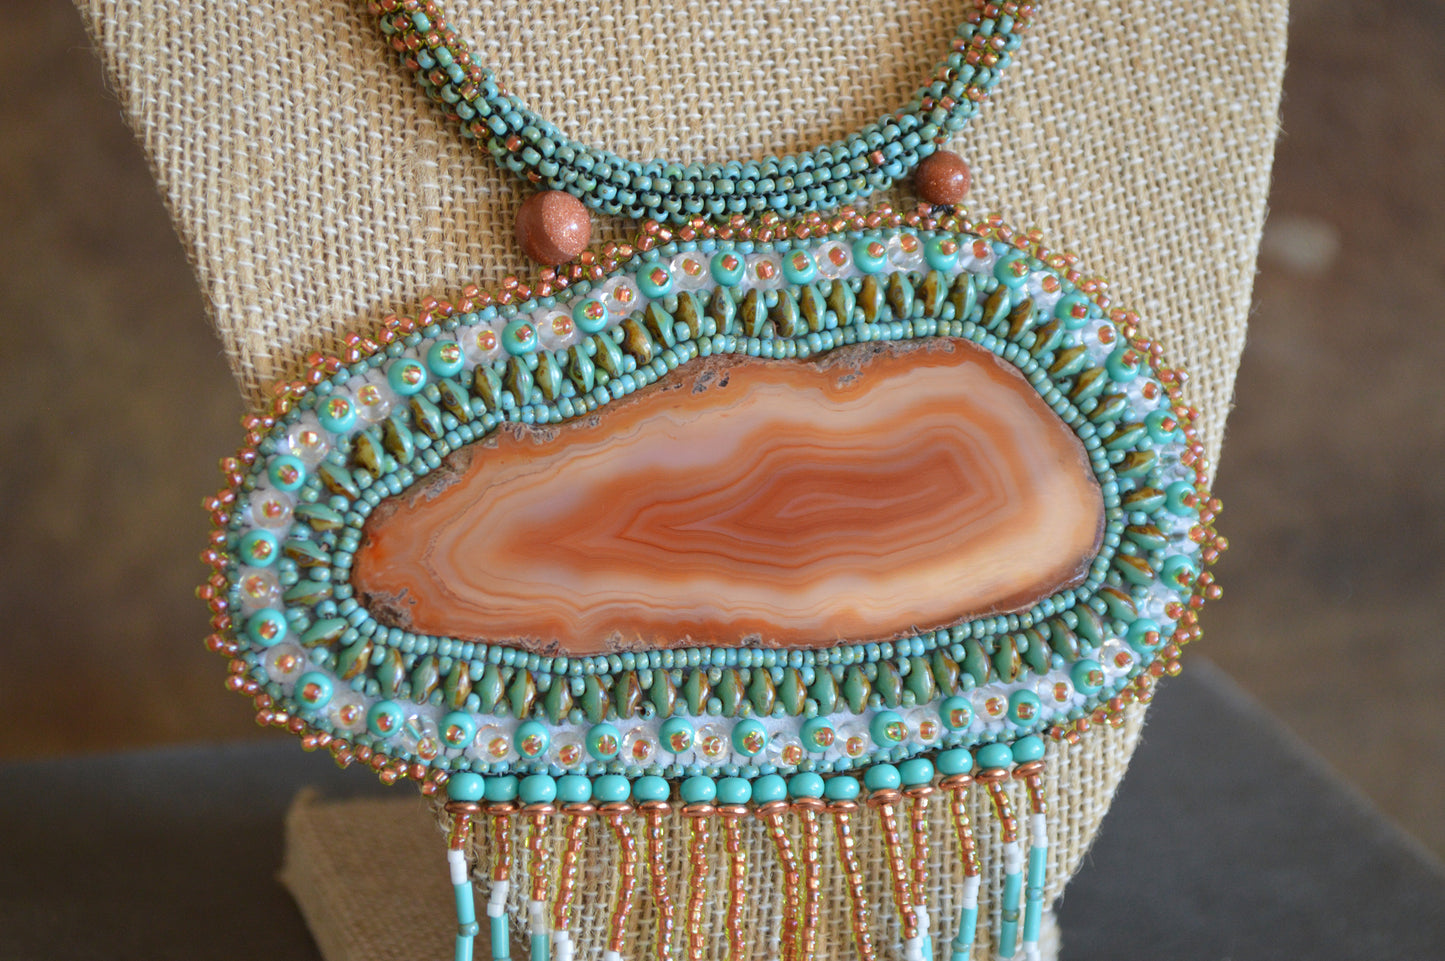 One of a kind huge bead embroidery statement necklace / earthy Western feel / Artisan handmade dyed agate / beaded rope, beaded toggle